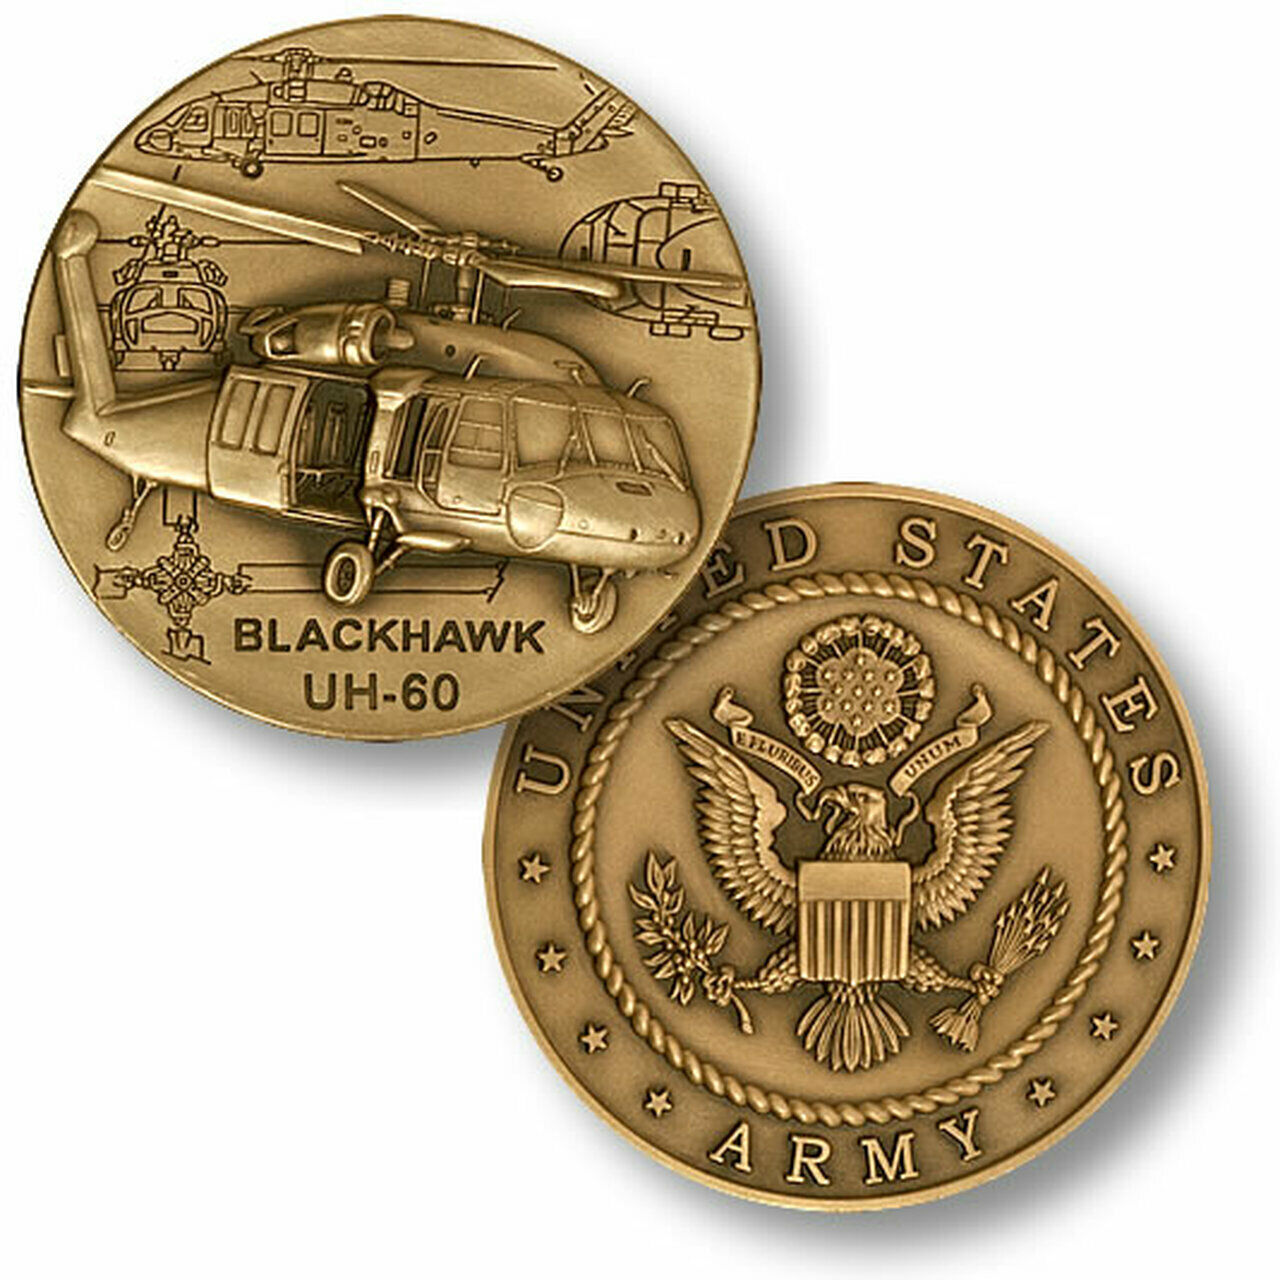 Sikorsky UH-60 Blackhawk Helicopter Challenge Coin, Aviation, US Army  NTM-48698